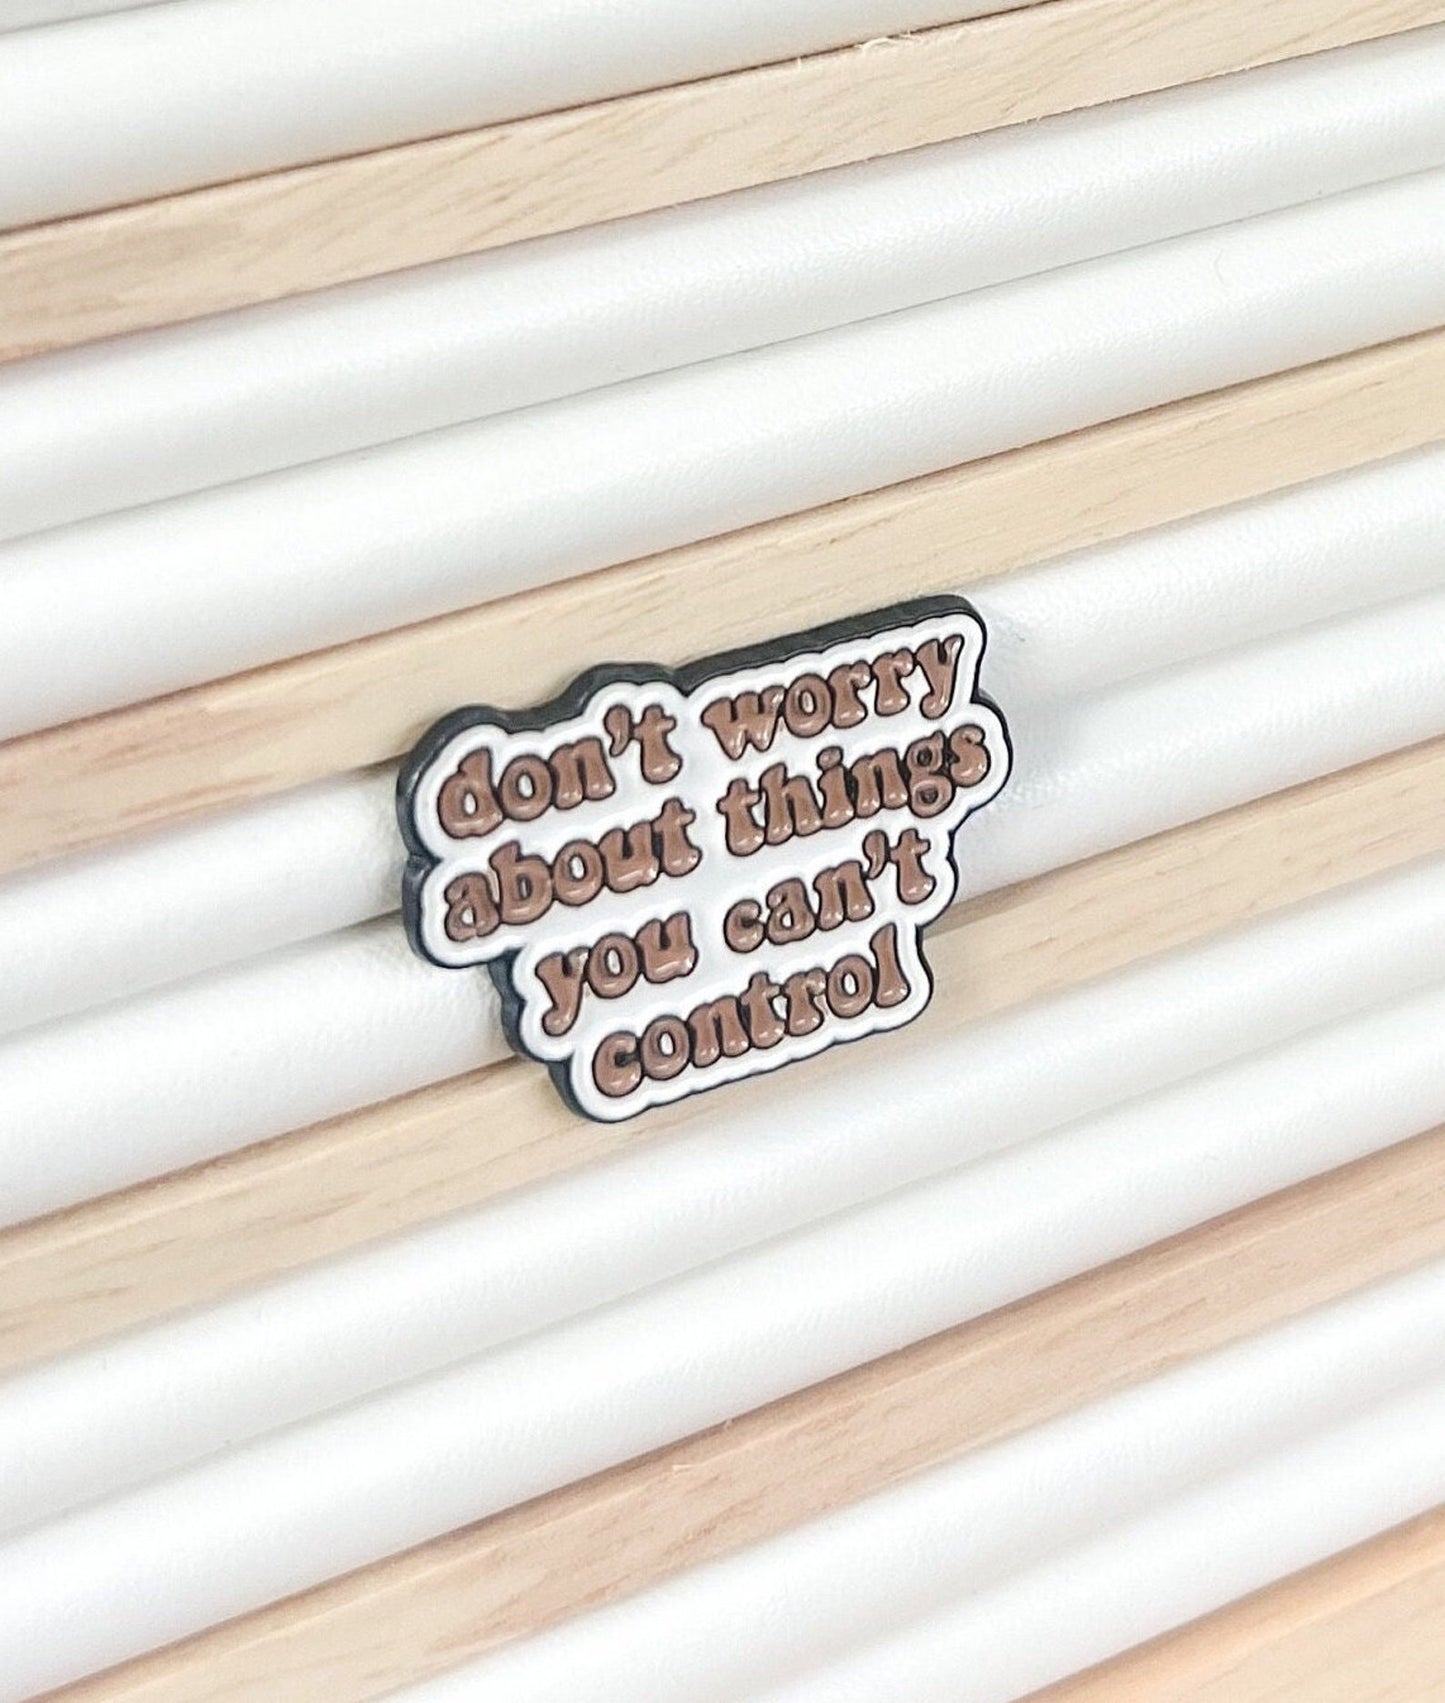 'Don't worry about things you can't control' Enamel Pin